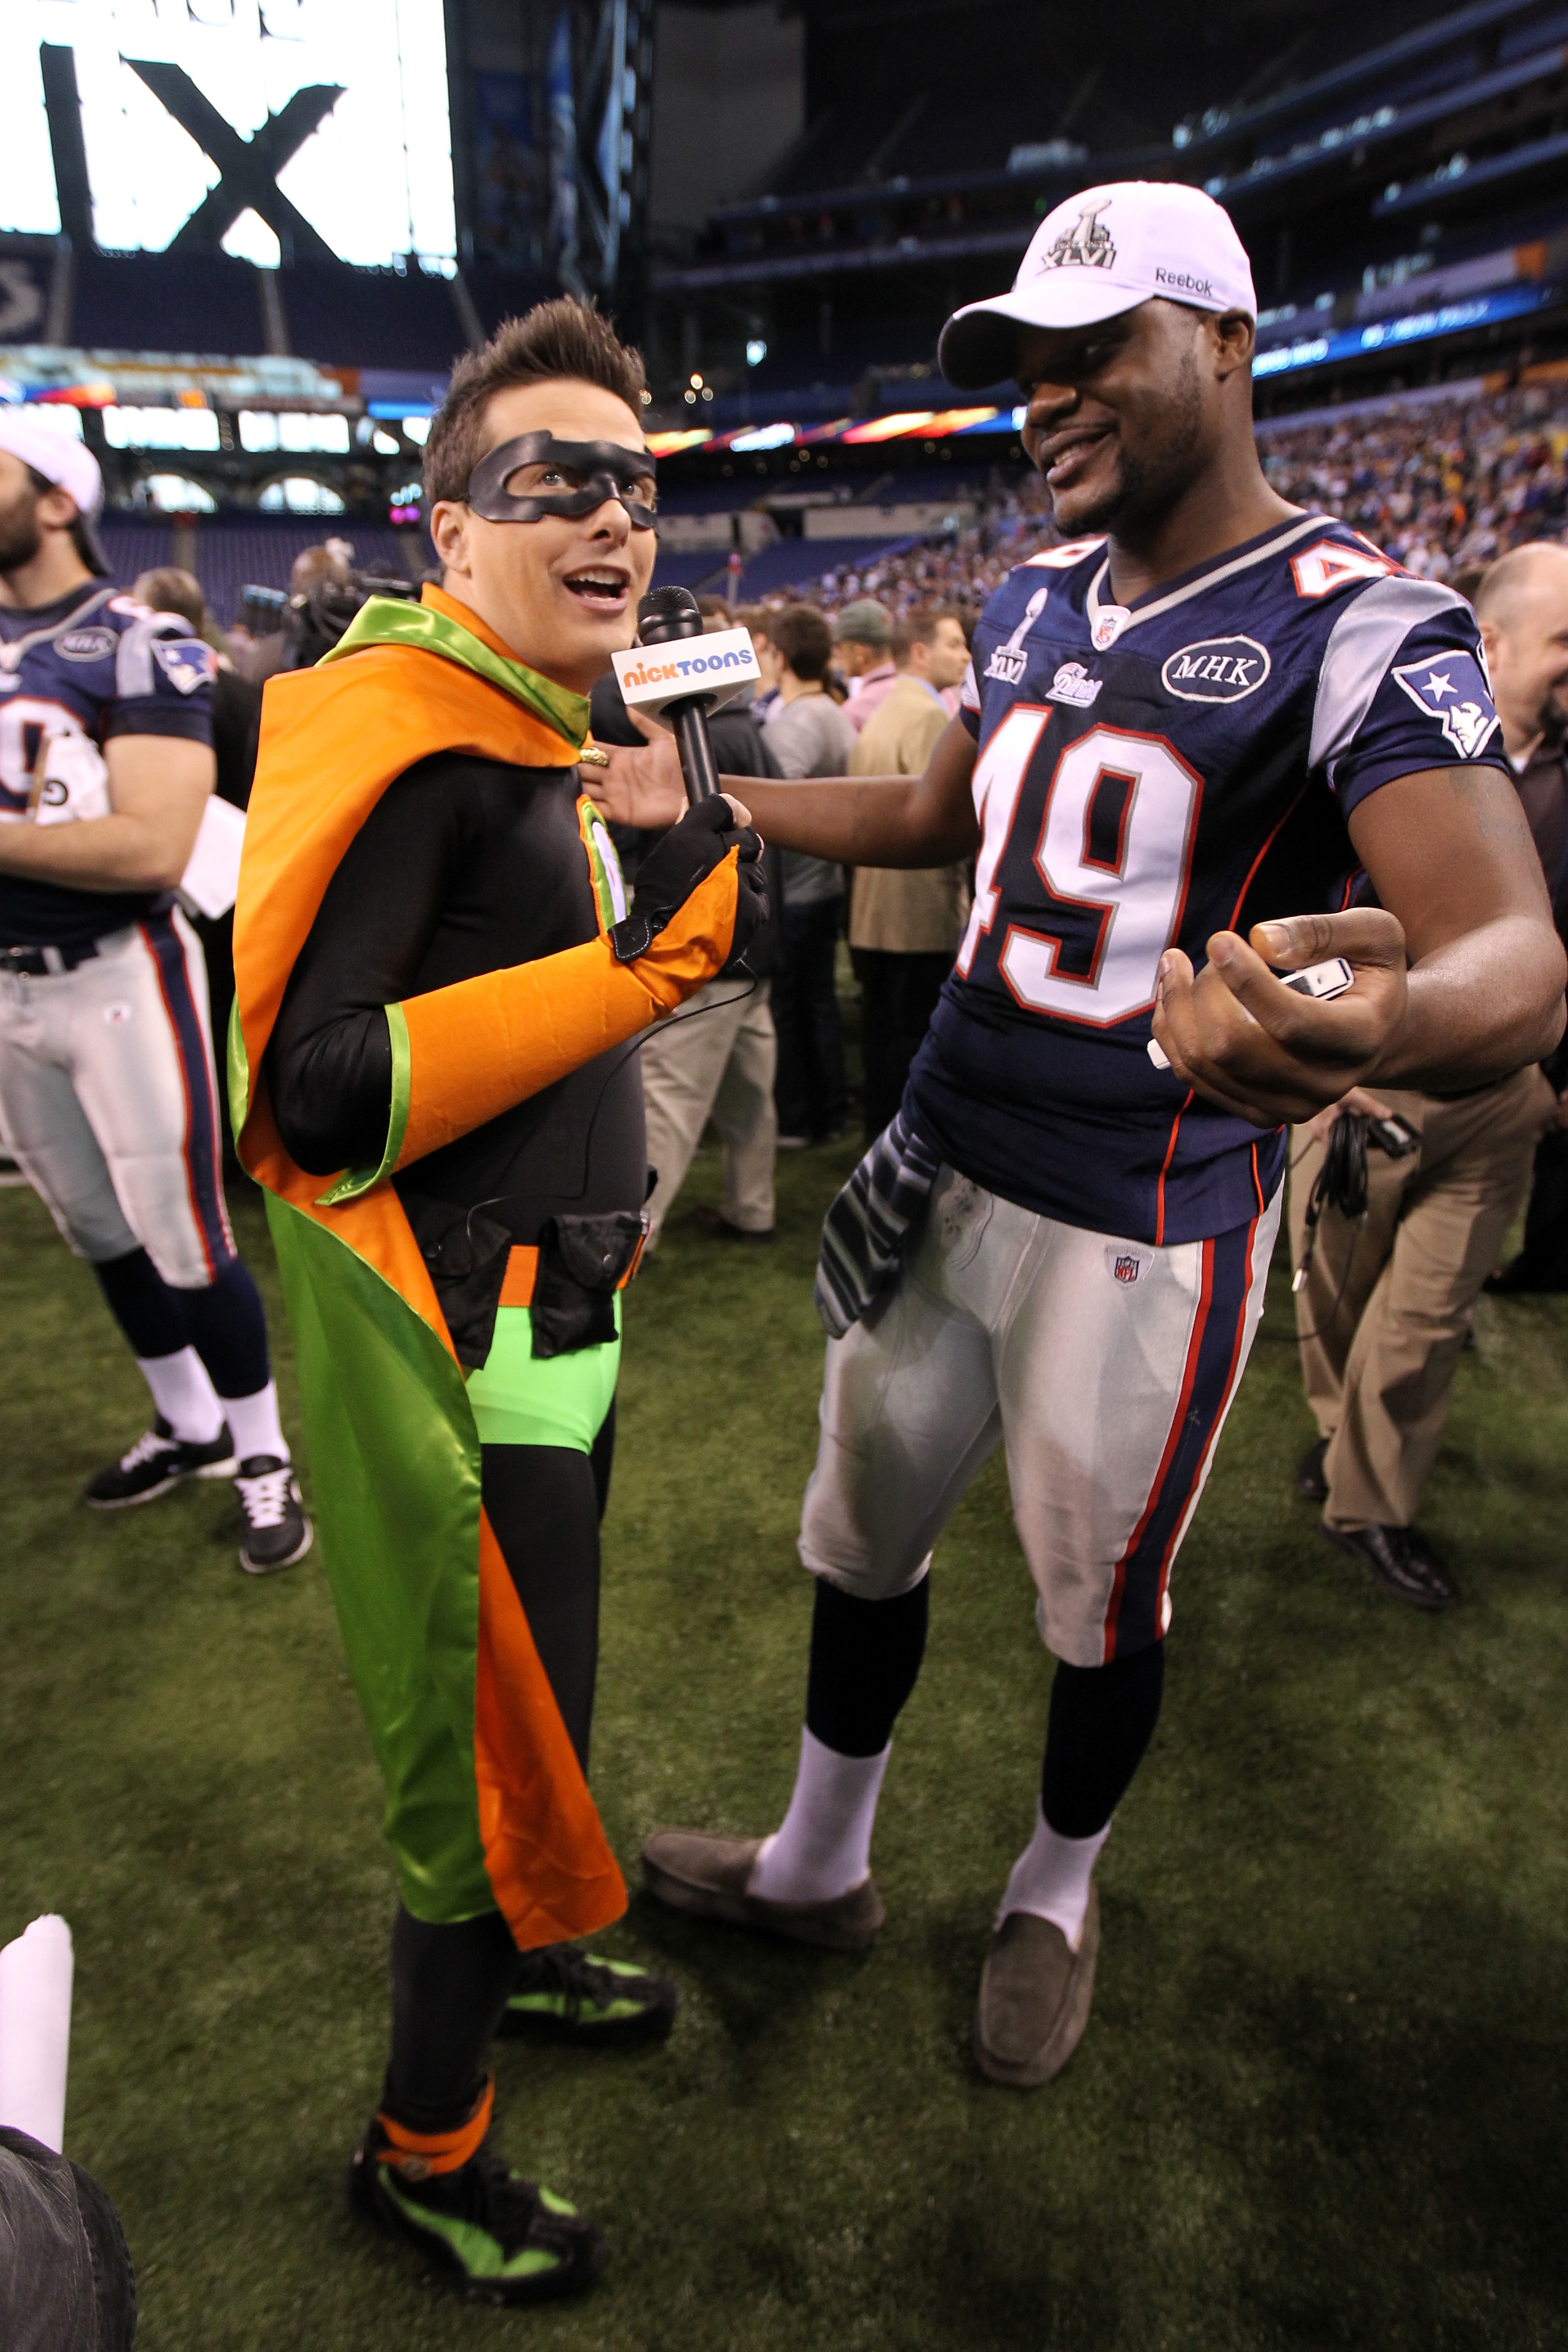 A member of the media dressed as a super hero interviews Markell Carter #49 of the New England Patriots during Media Day ahead of Super Bowl XLVI.  (Photo by Andy Lyons/Getty Images)